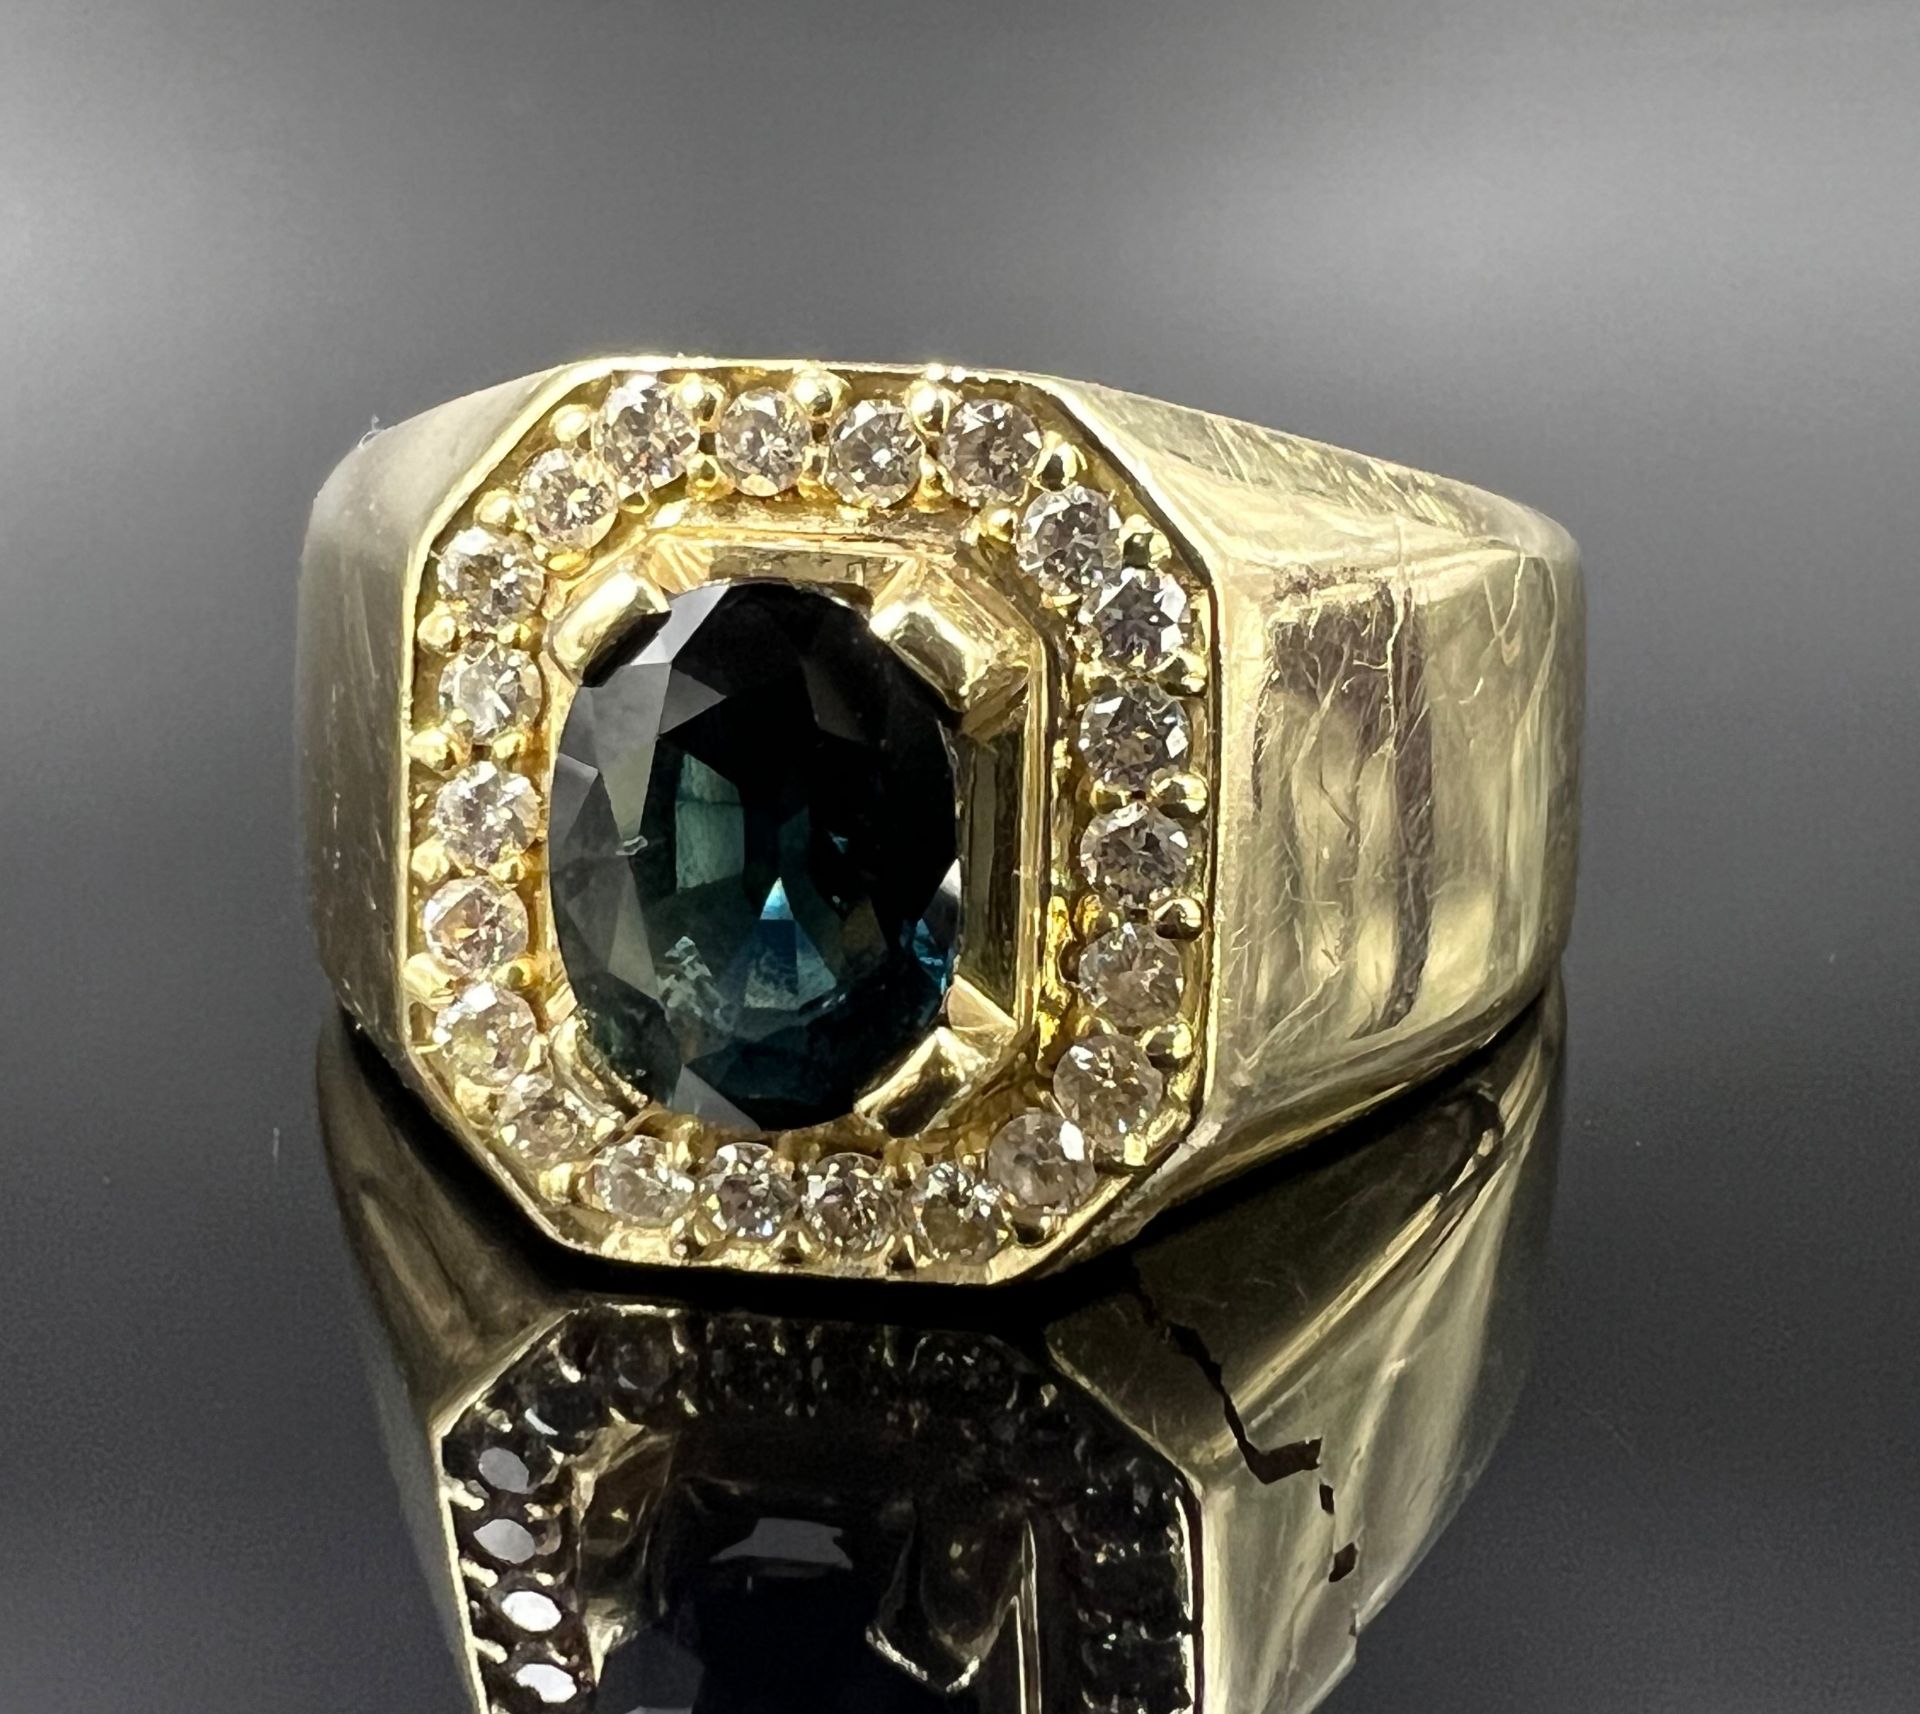 Ladies ring. 585 yellow gold. 1 blue coloured stone and diamonds.